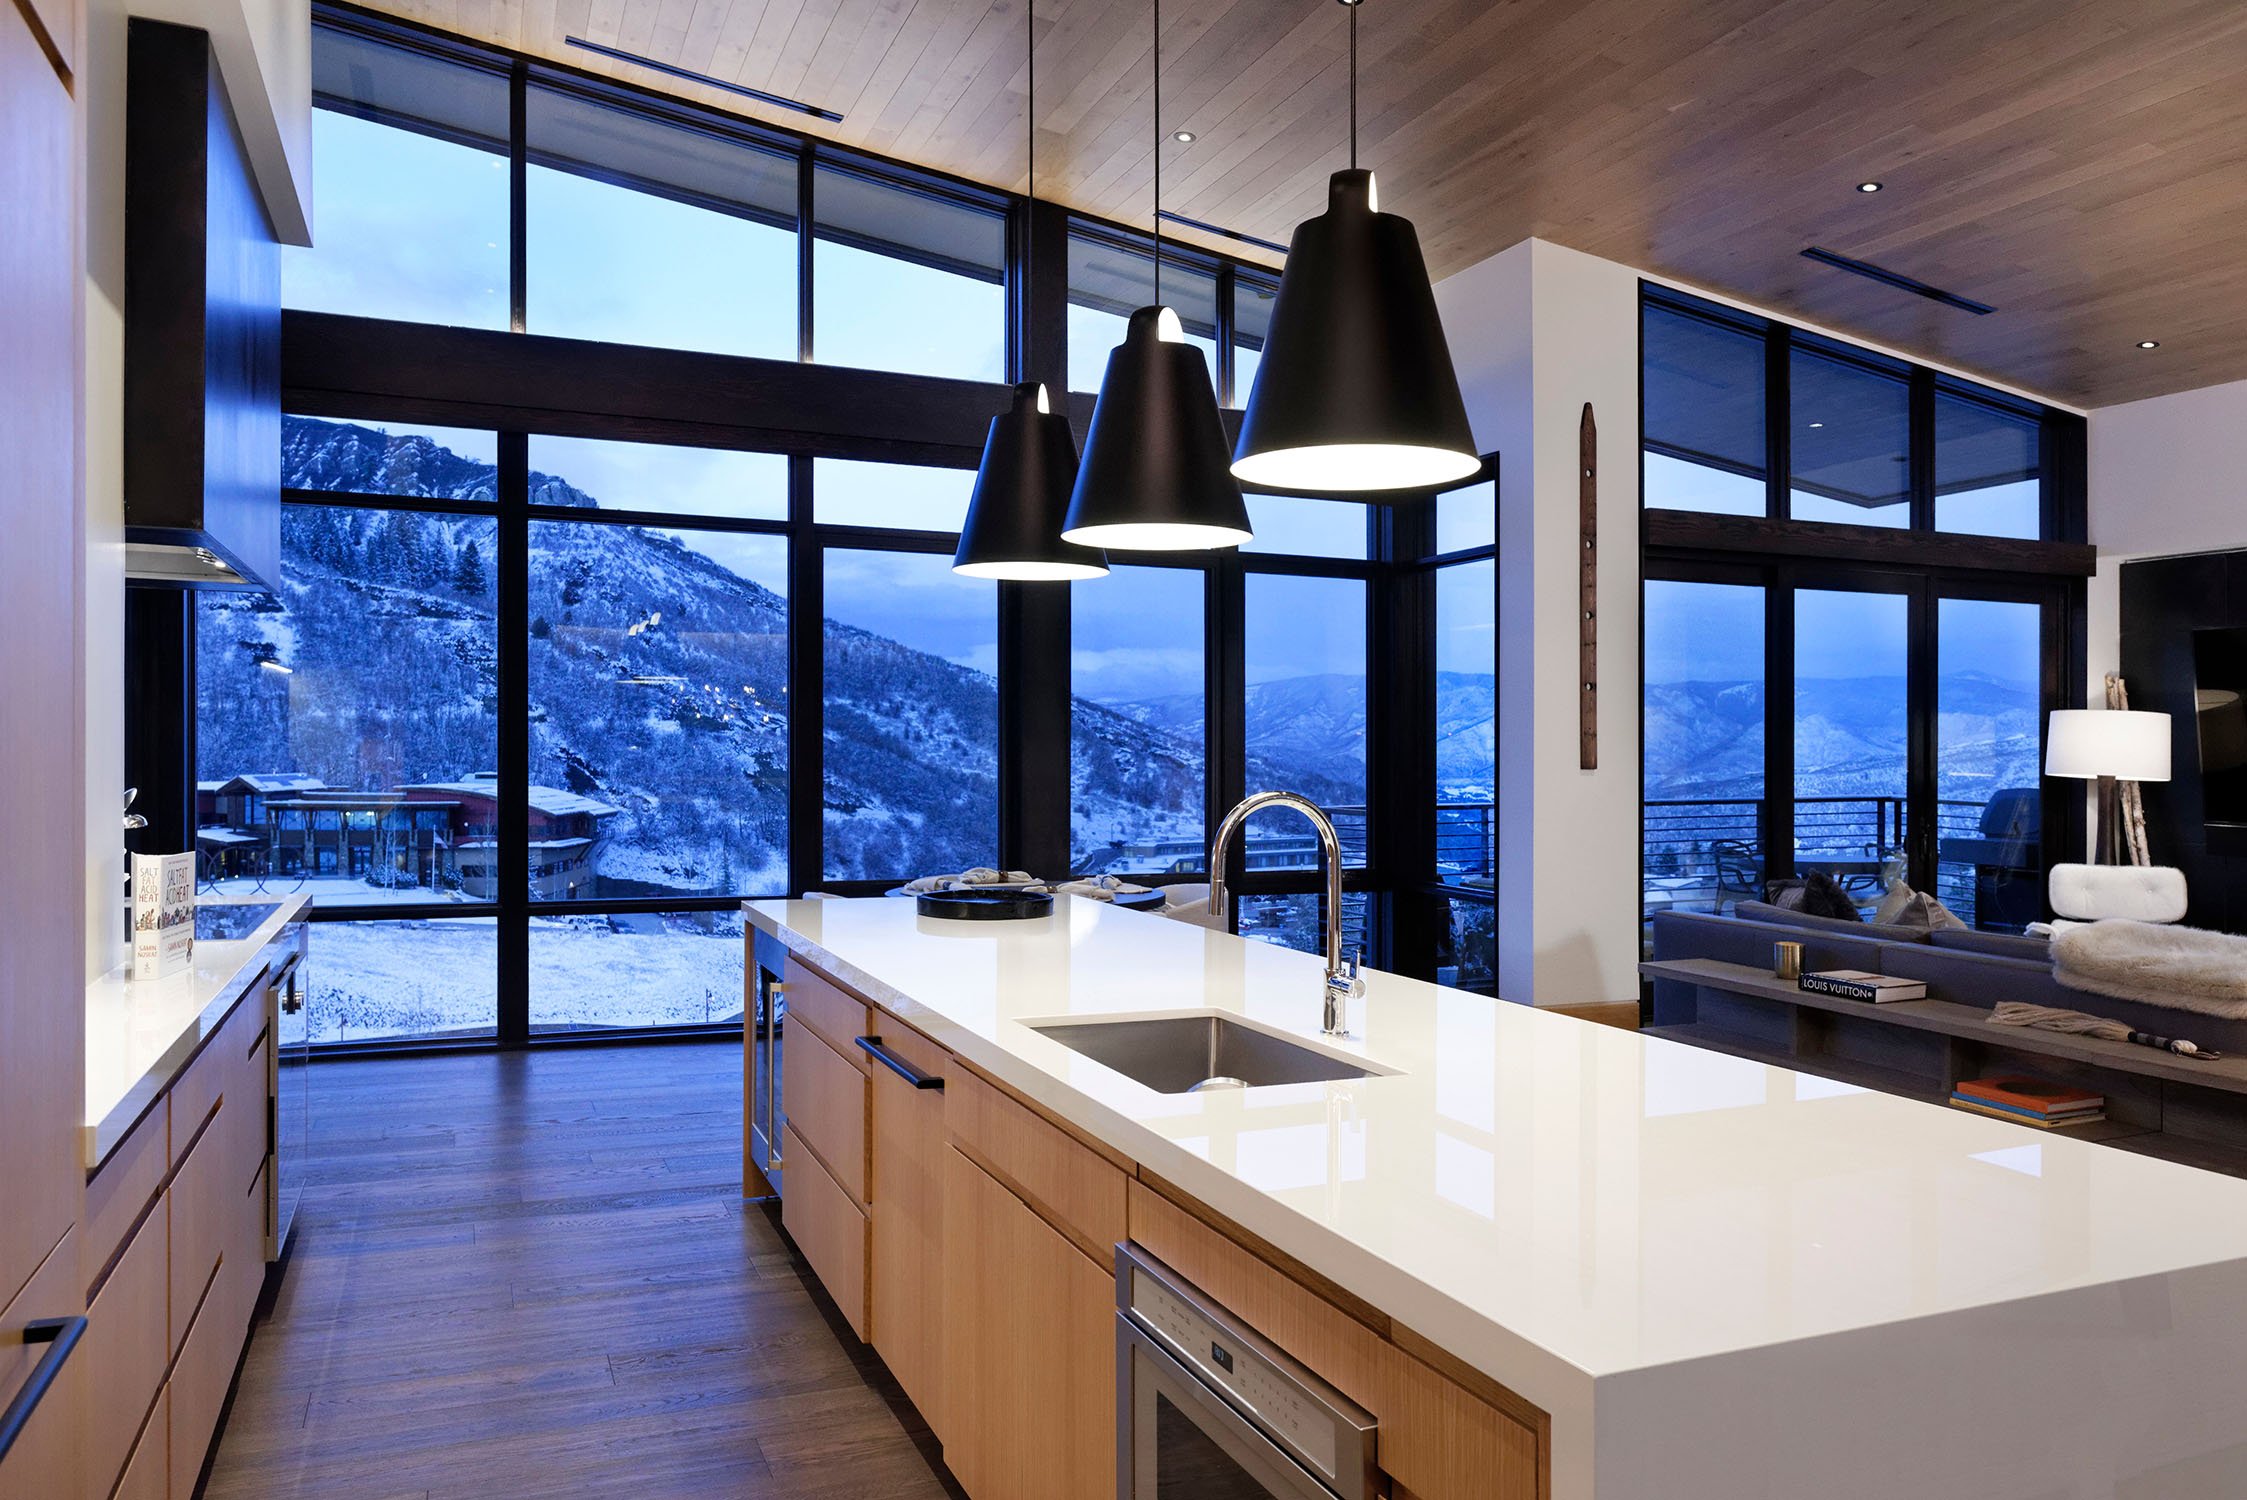 One Snowmass Kitchen View at Night (Copy)